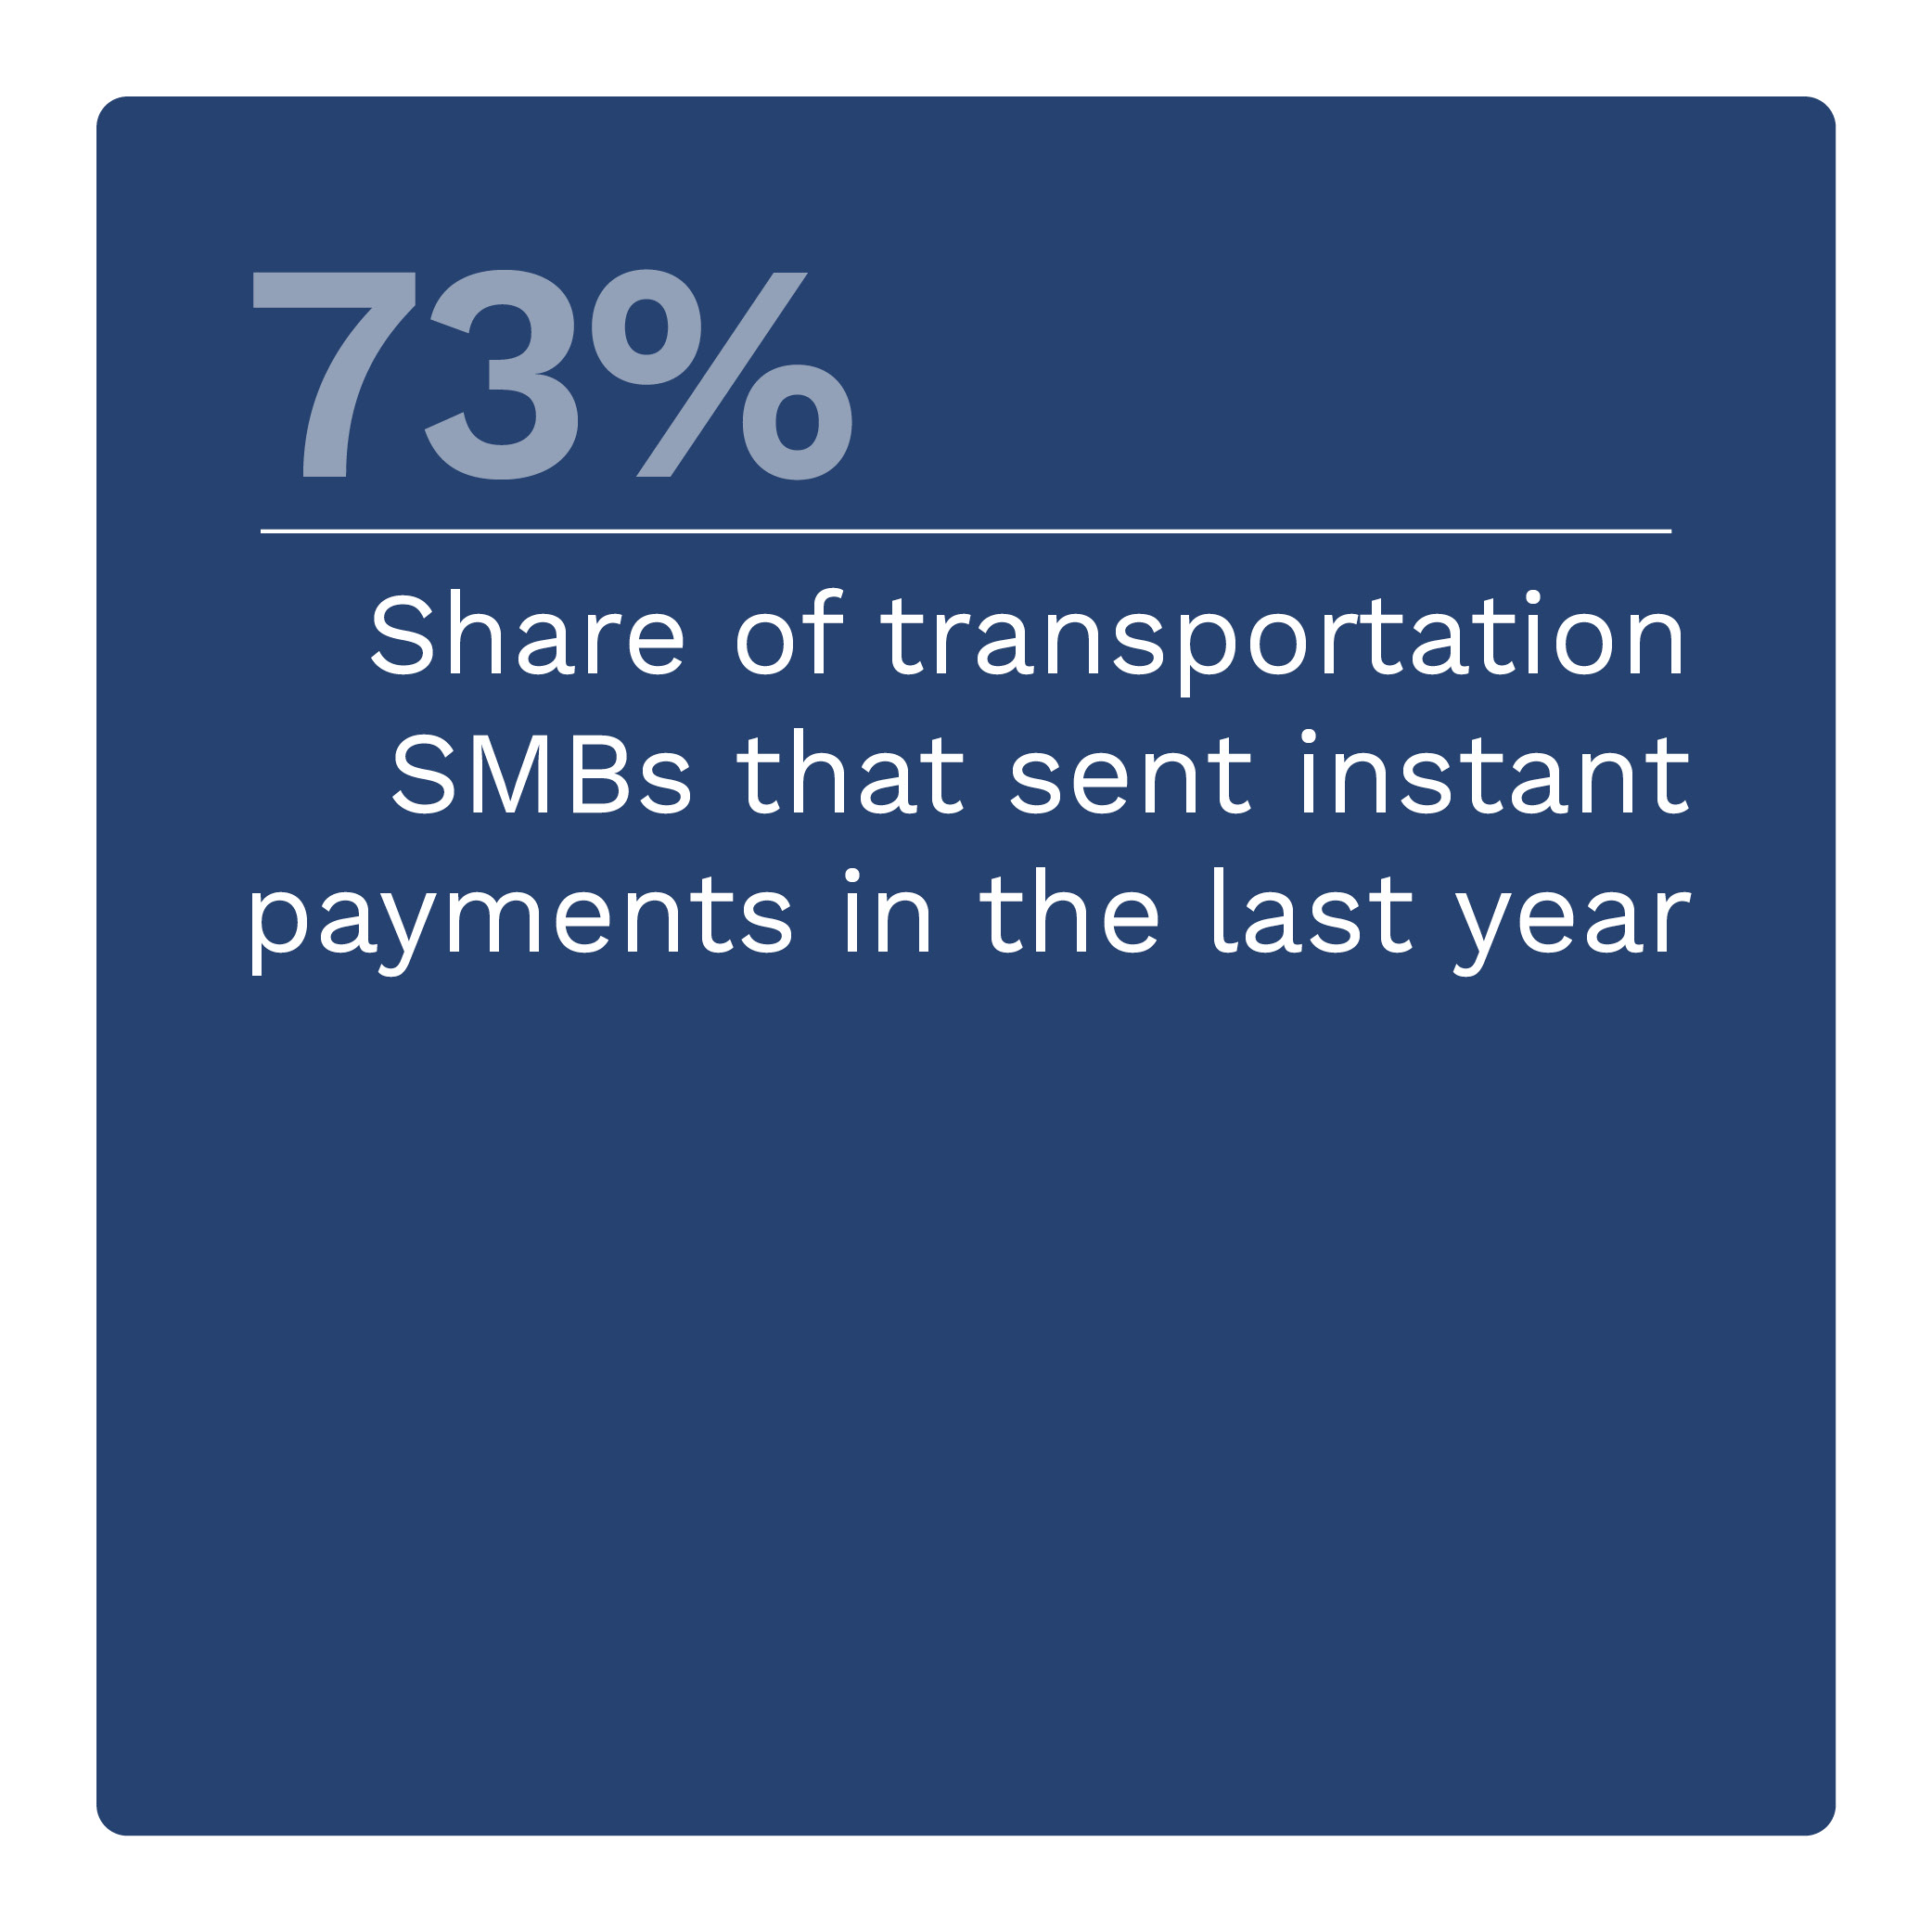 73%: Share of transportation SMBs that sent instant payments in the last year